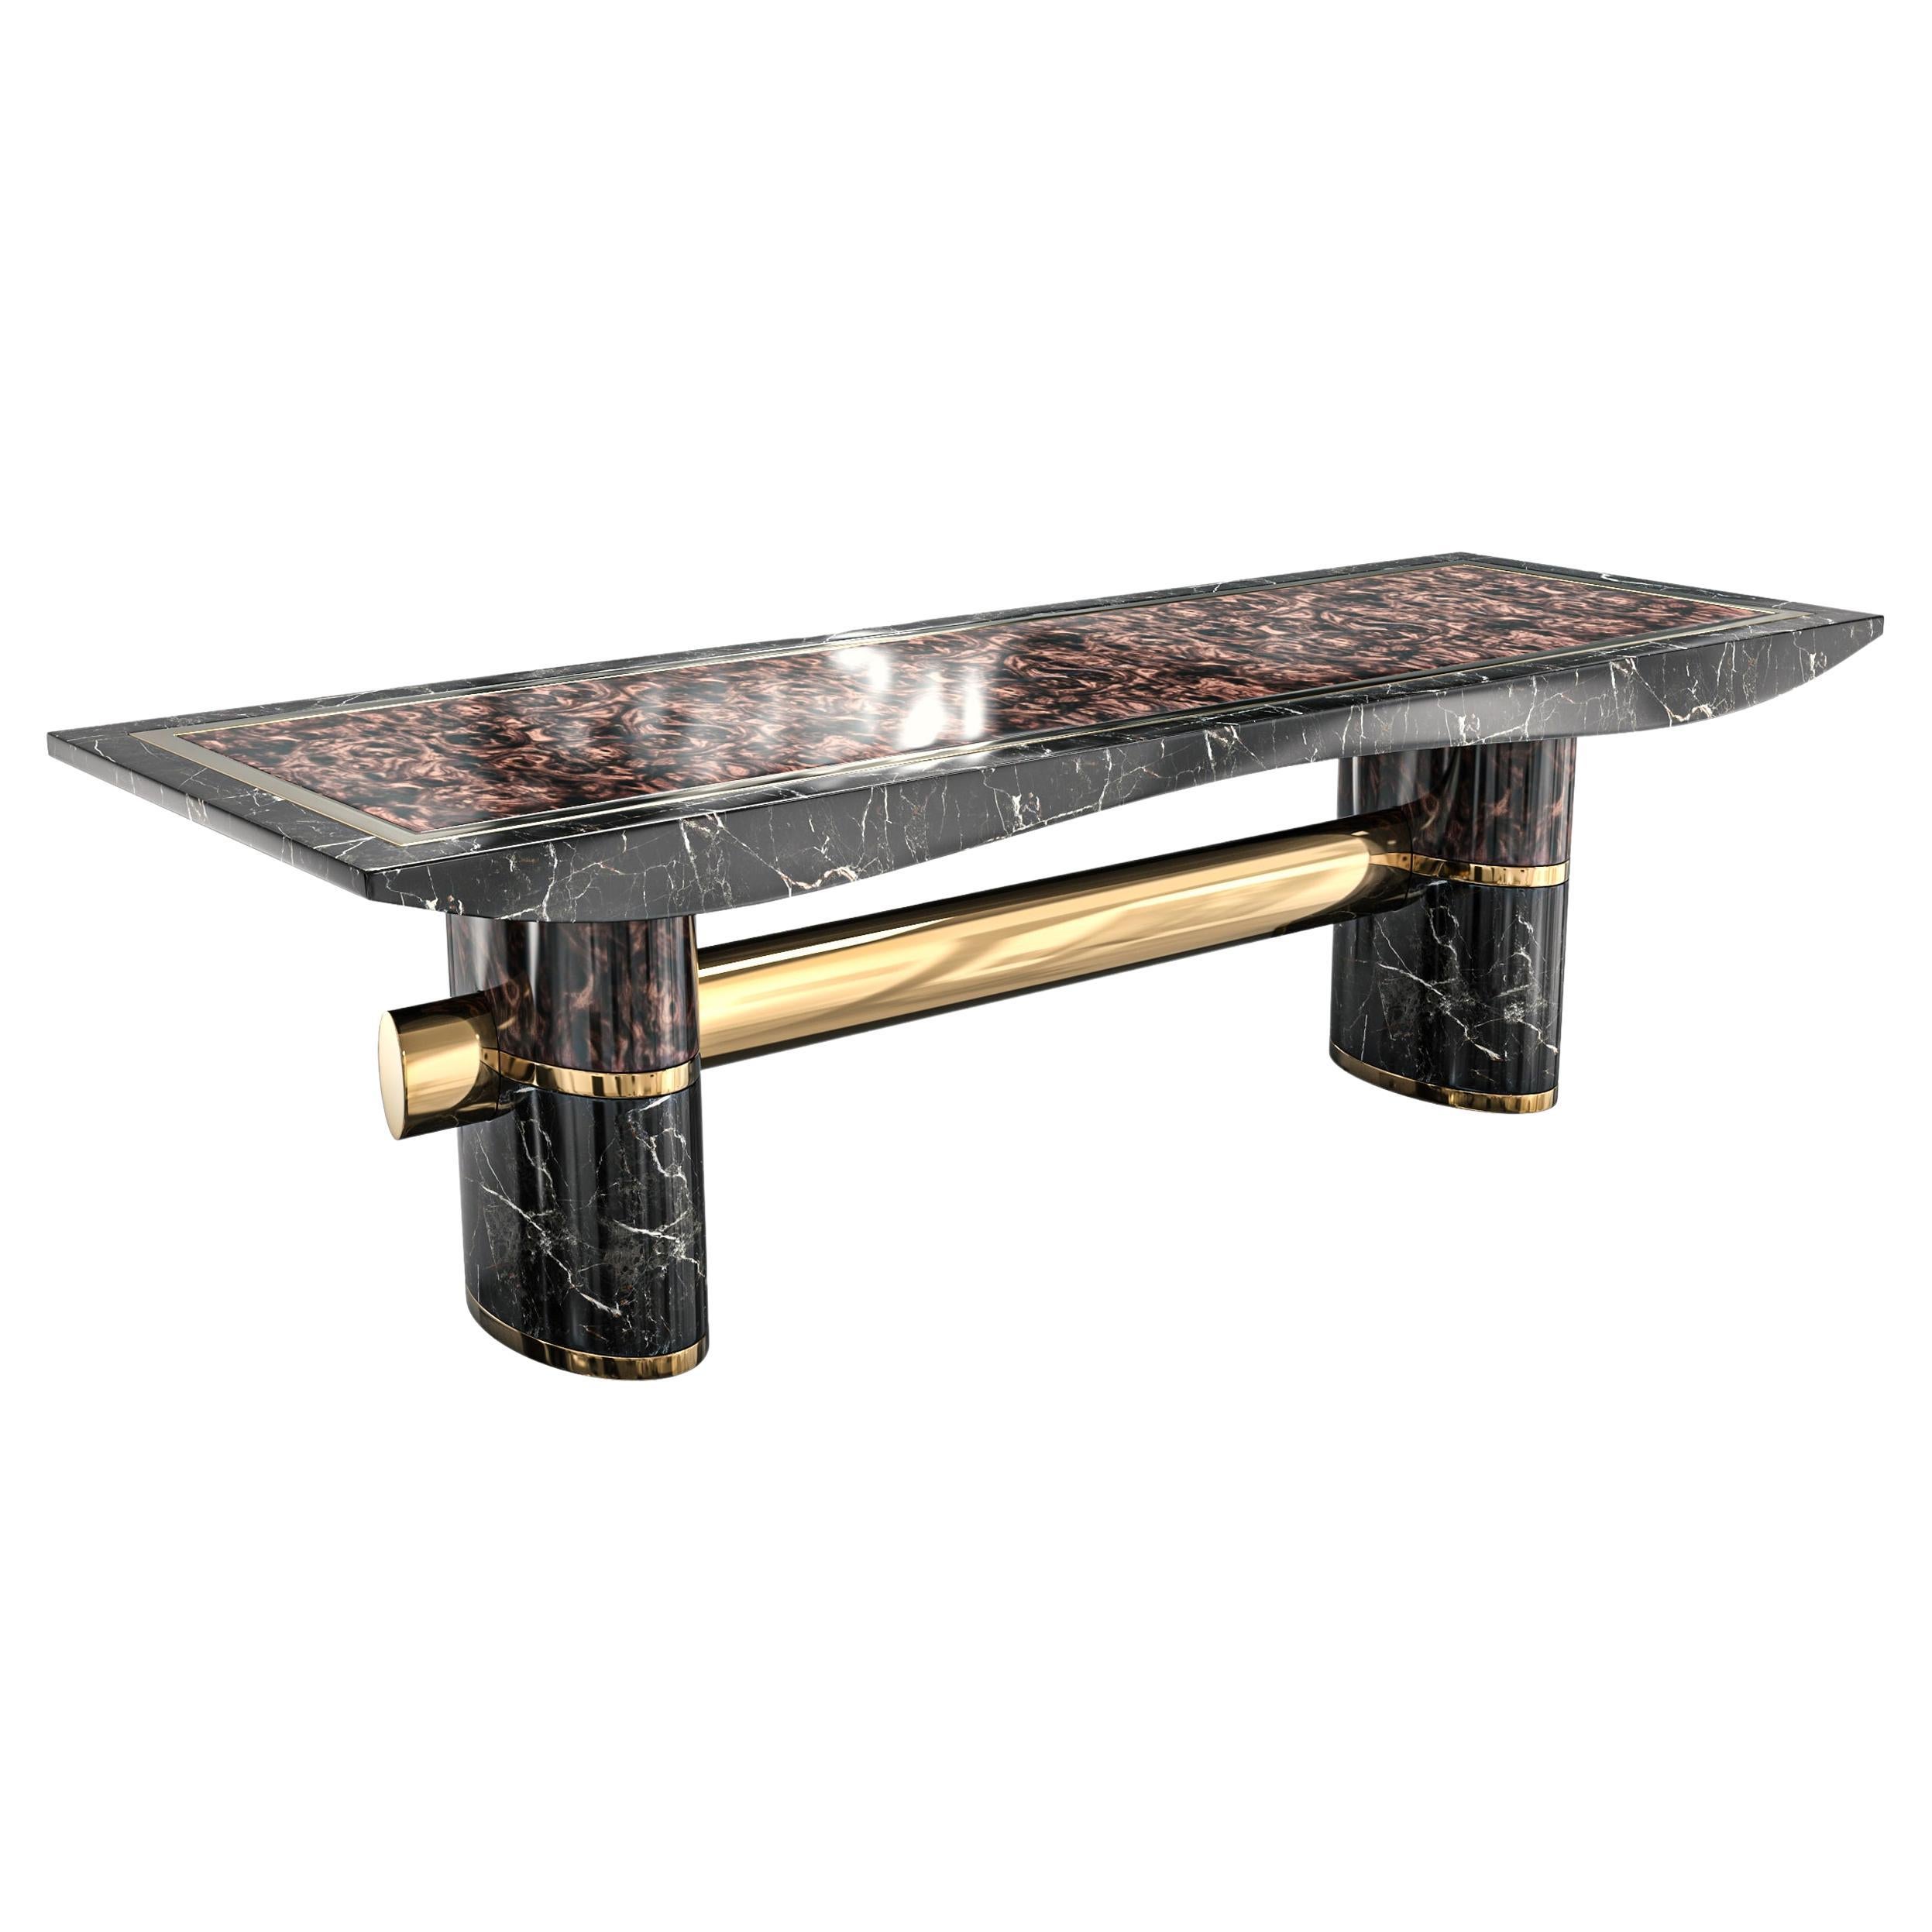 "Ragazzo" Handcrafted Desk with Marble, Burl Walnut and Bronze, Istanbul For Sale